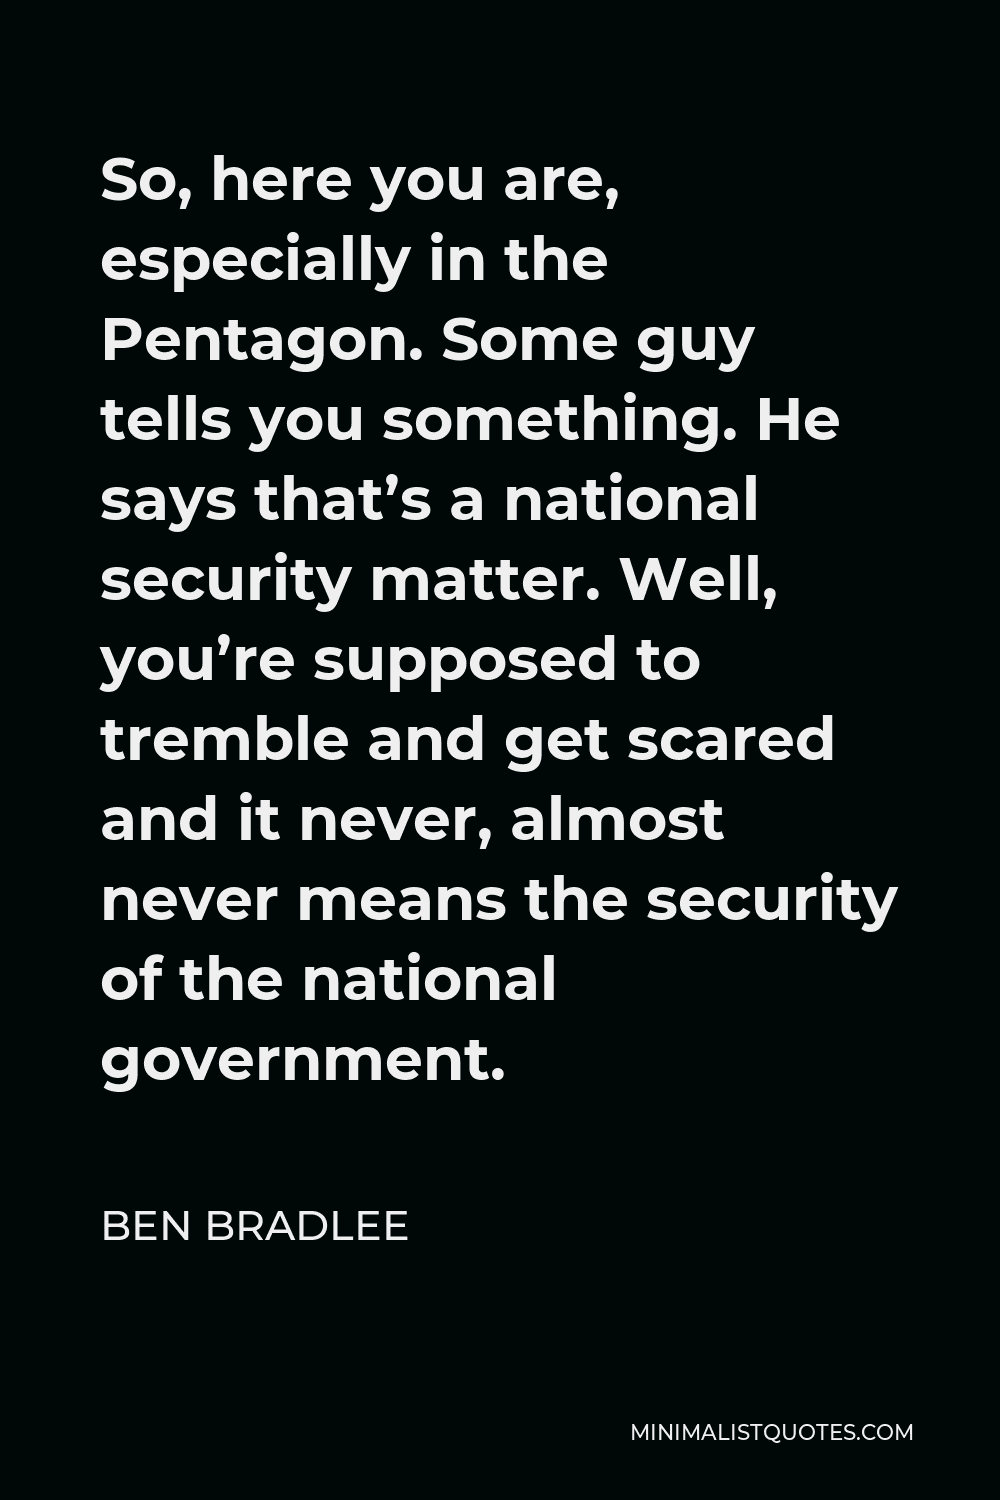 Ben Bradlee Quote - So, here you are, especially in the Pentagon. Some guy tells you something. He says that’s a national security matter. Well, you’re supposed to tremble and get scared and it never, almost never means the security of the national government.